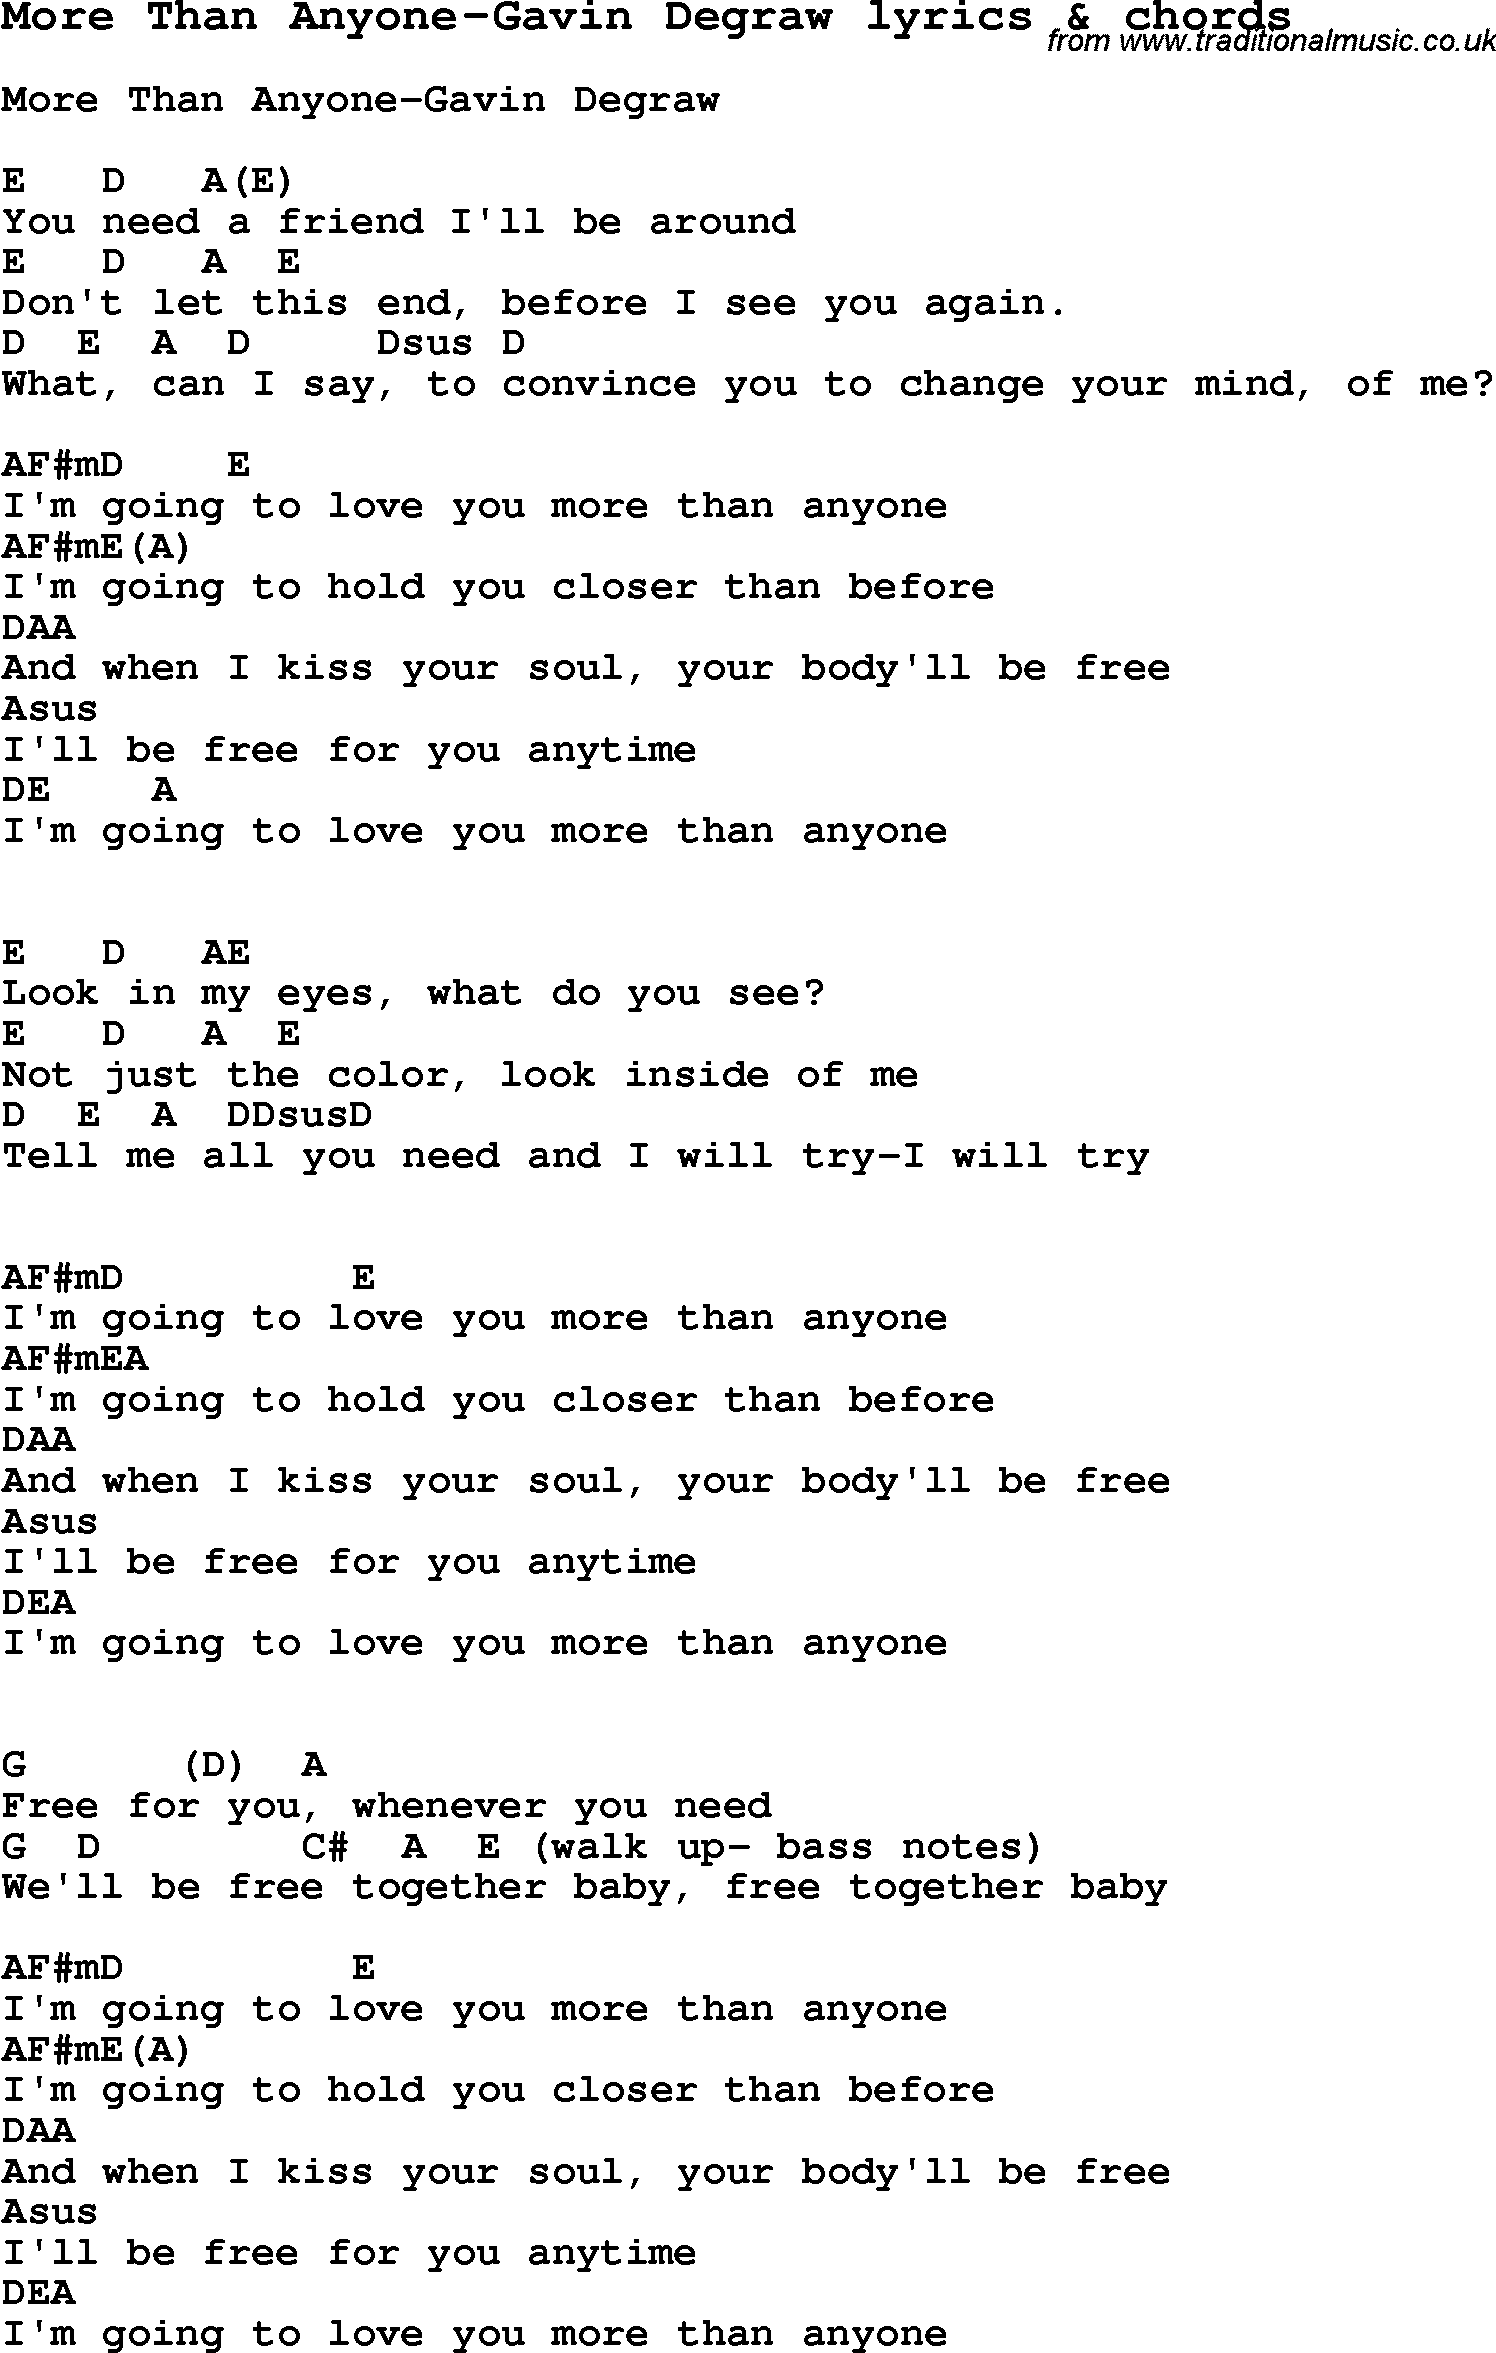 Love Song Lyrics for: More Than Anyone-Gavin Degraw with chords for Ukulele, Guitar Banjo etc.